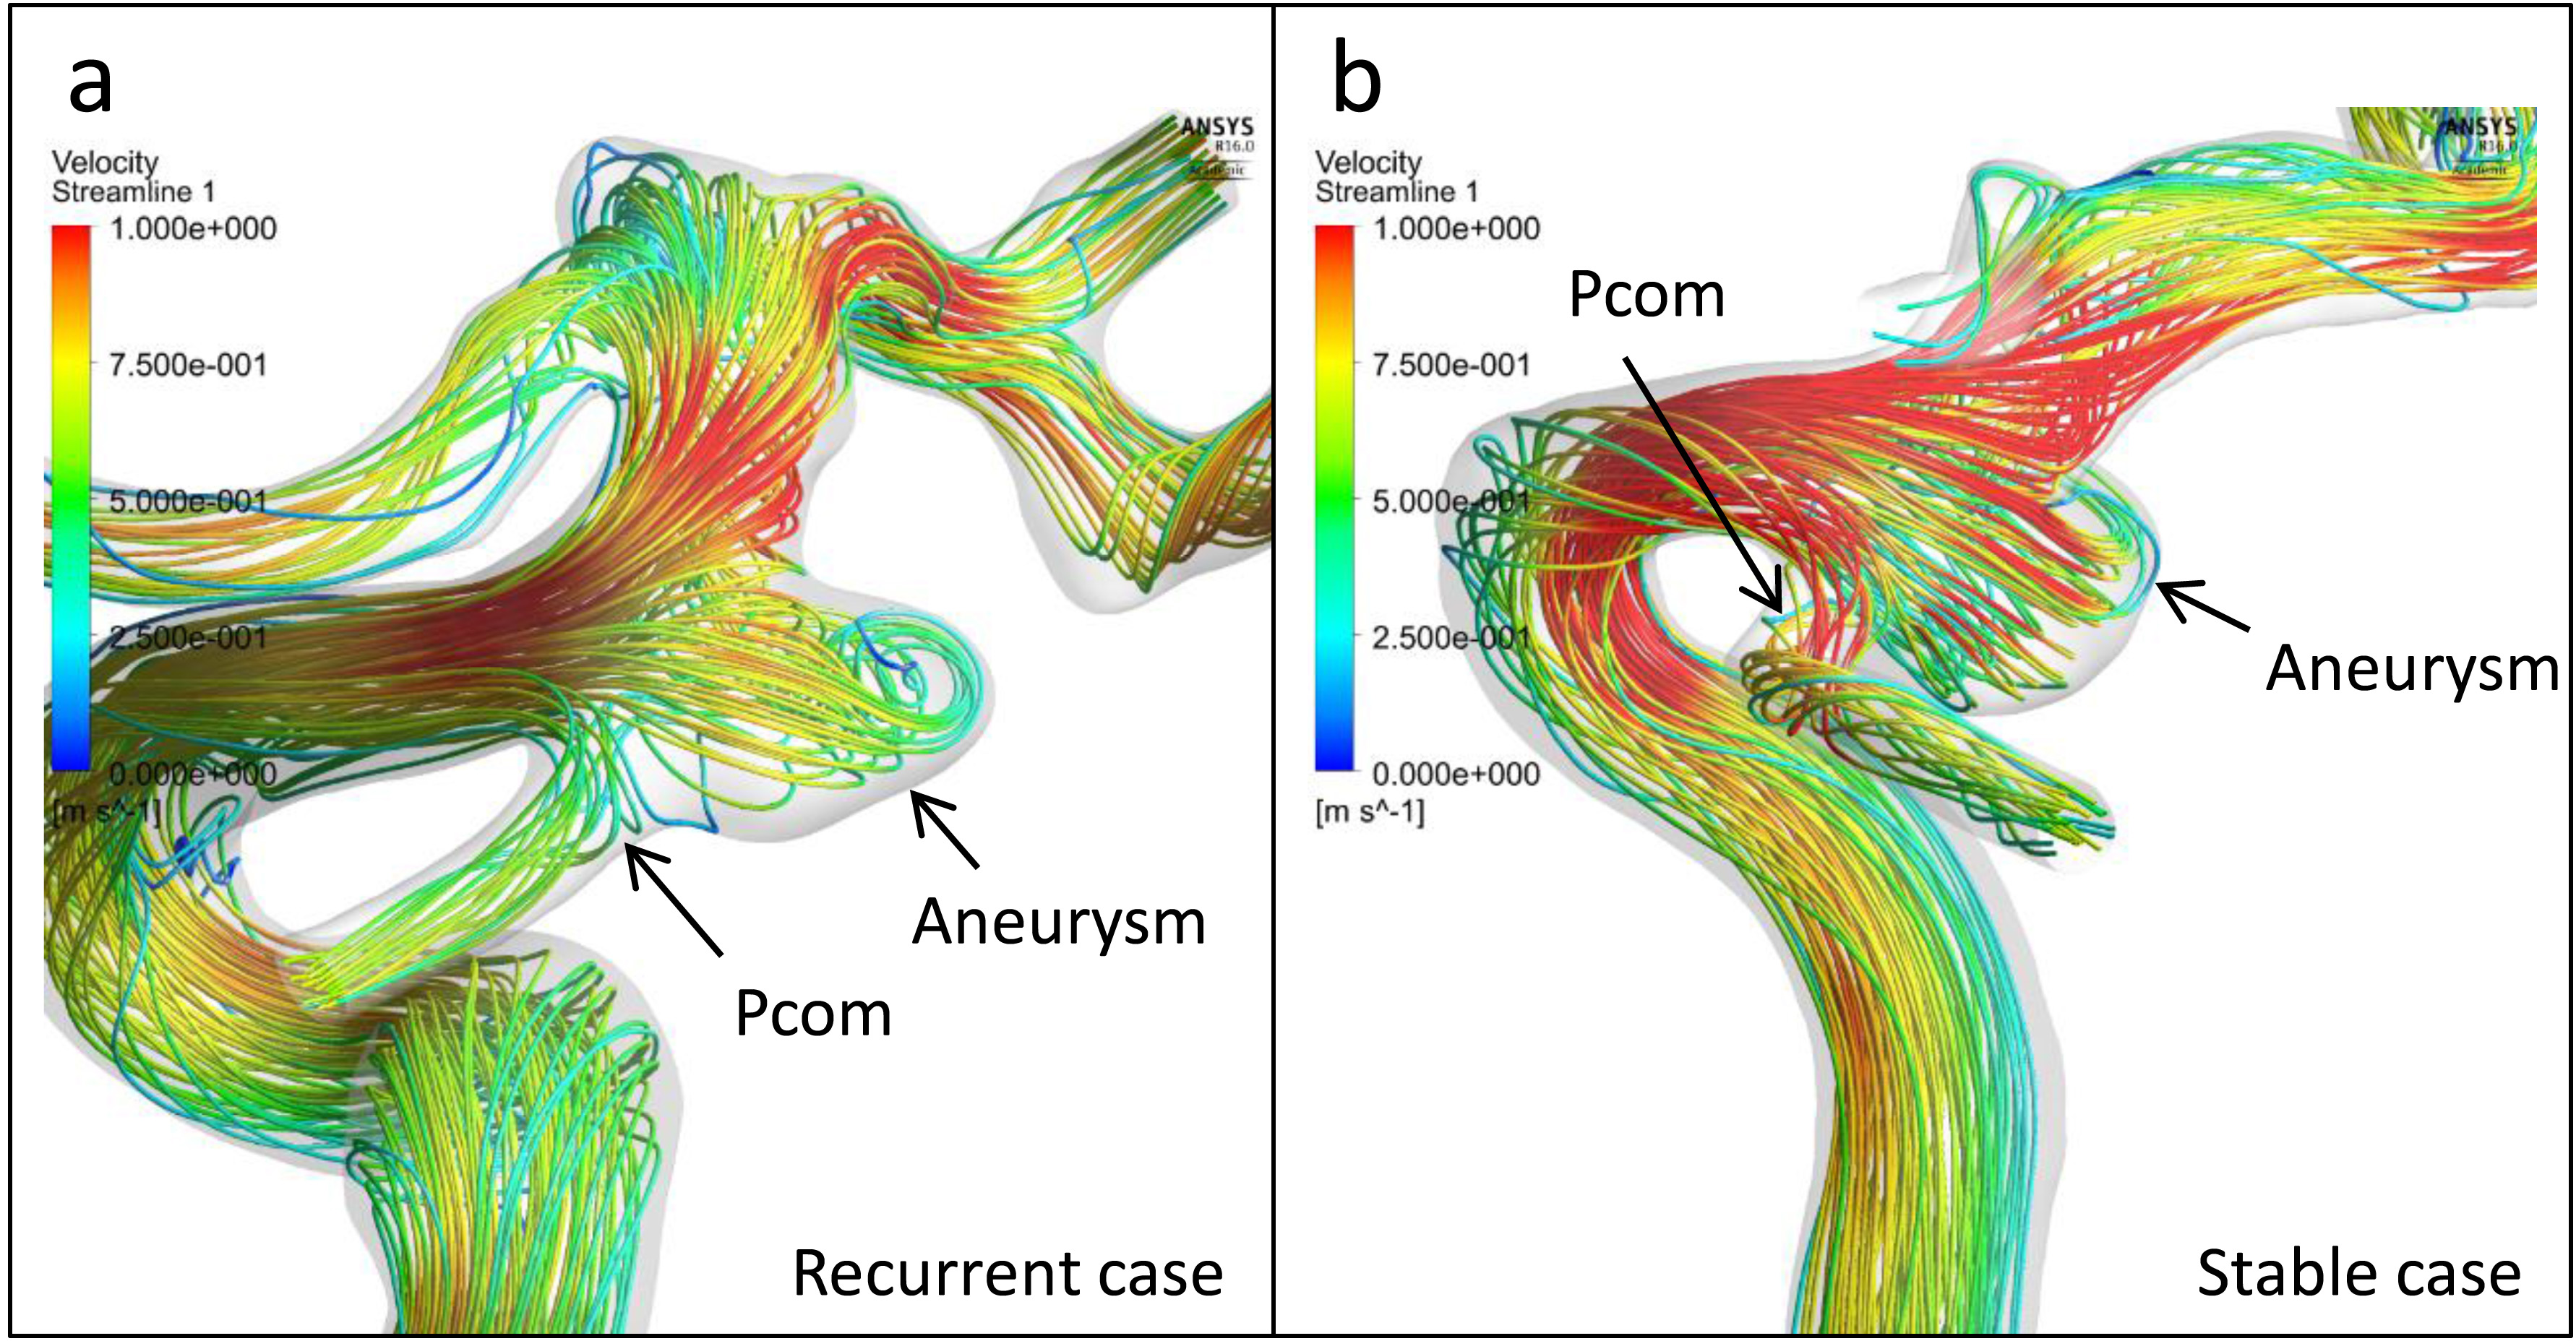 Streamlines of the representative cases. (a): Streamlines of the pretreatment vascular model of the recurrent case in Fig. 2 show that the velocities of Pcom and ICA were almost 25 to 50 cm/s and 75 to 100 cm/s, respectively. These results correspond to the velocity ratio of 0.397. (b): Streamlines of the representative stable case in Fig. 2 show that the velocities of Pcom and ICA were 75 to 100 cm/s and almost 100 cm/s, respectively, which were consonant with the velocity ratio of 0.793.